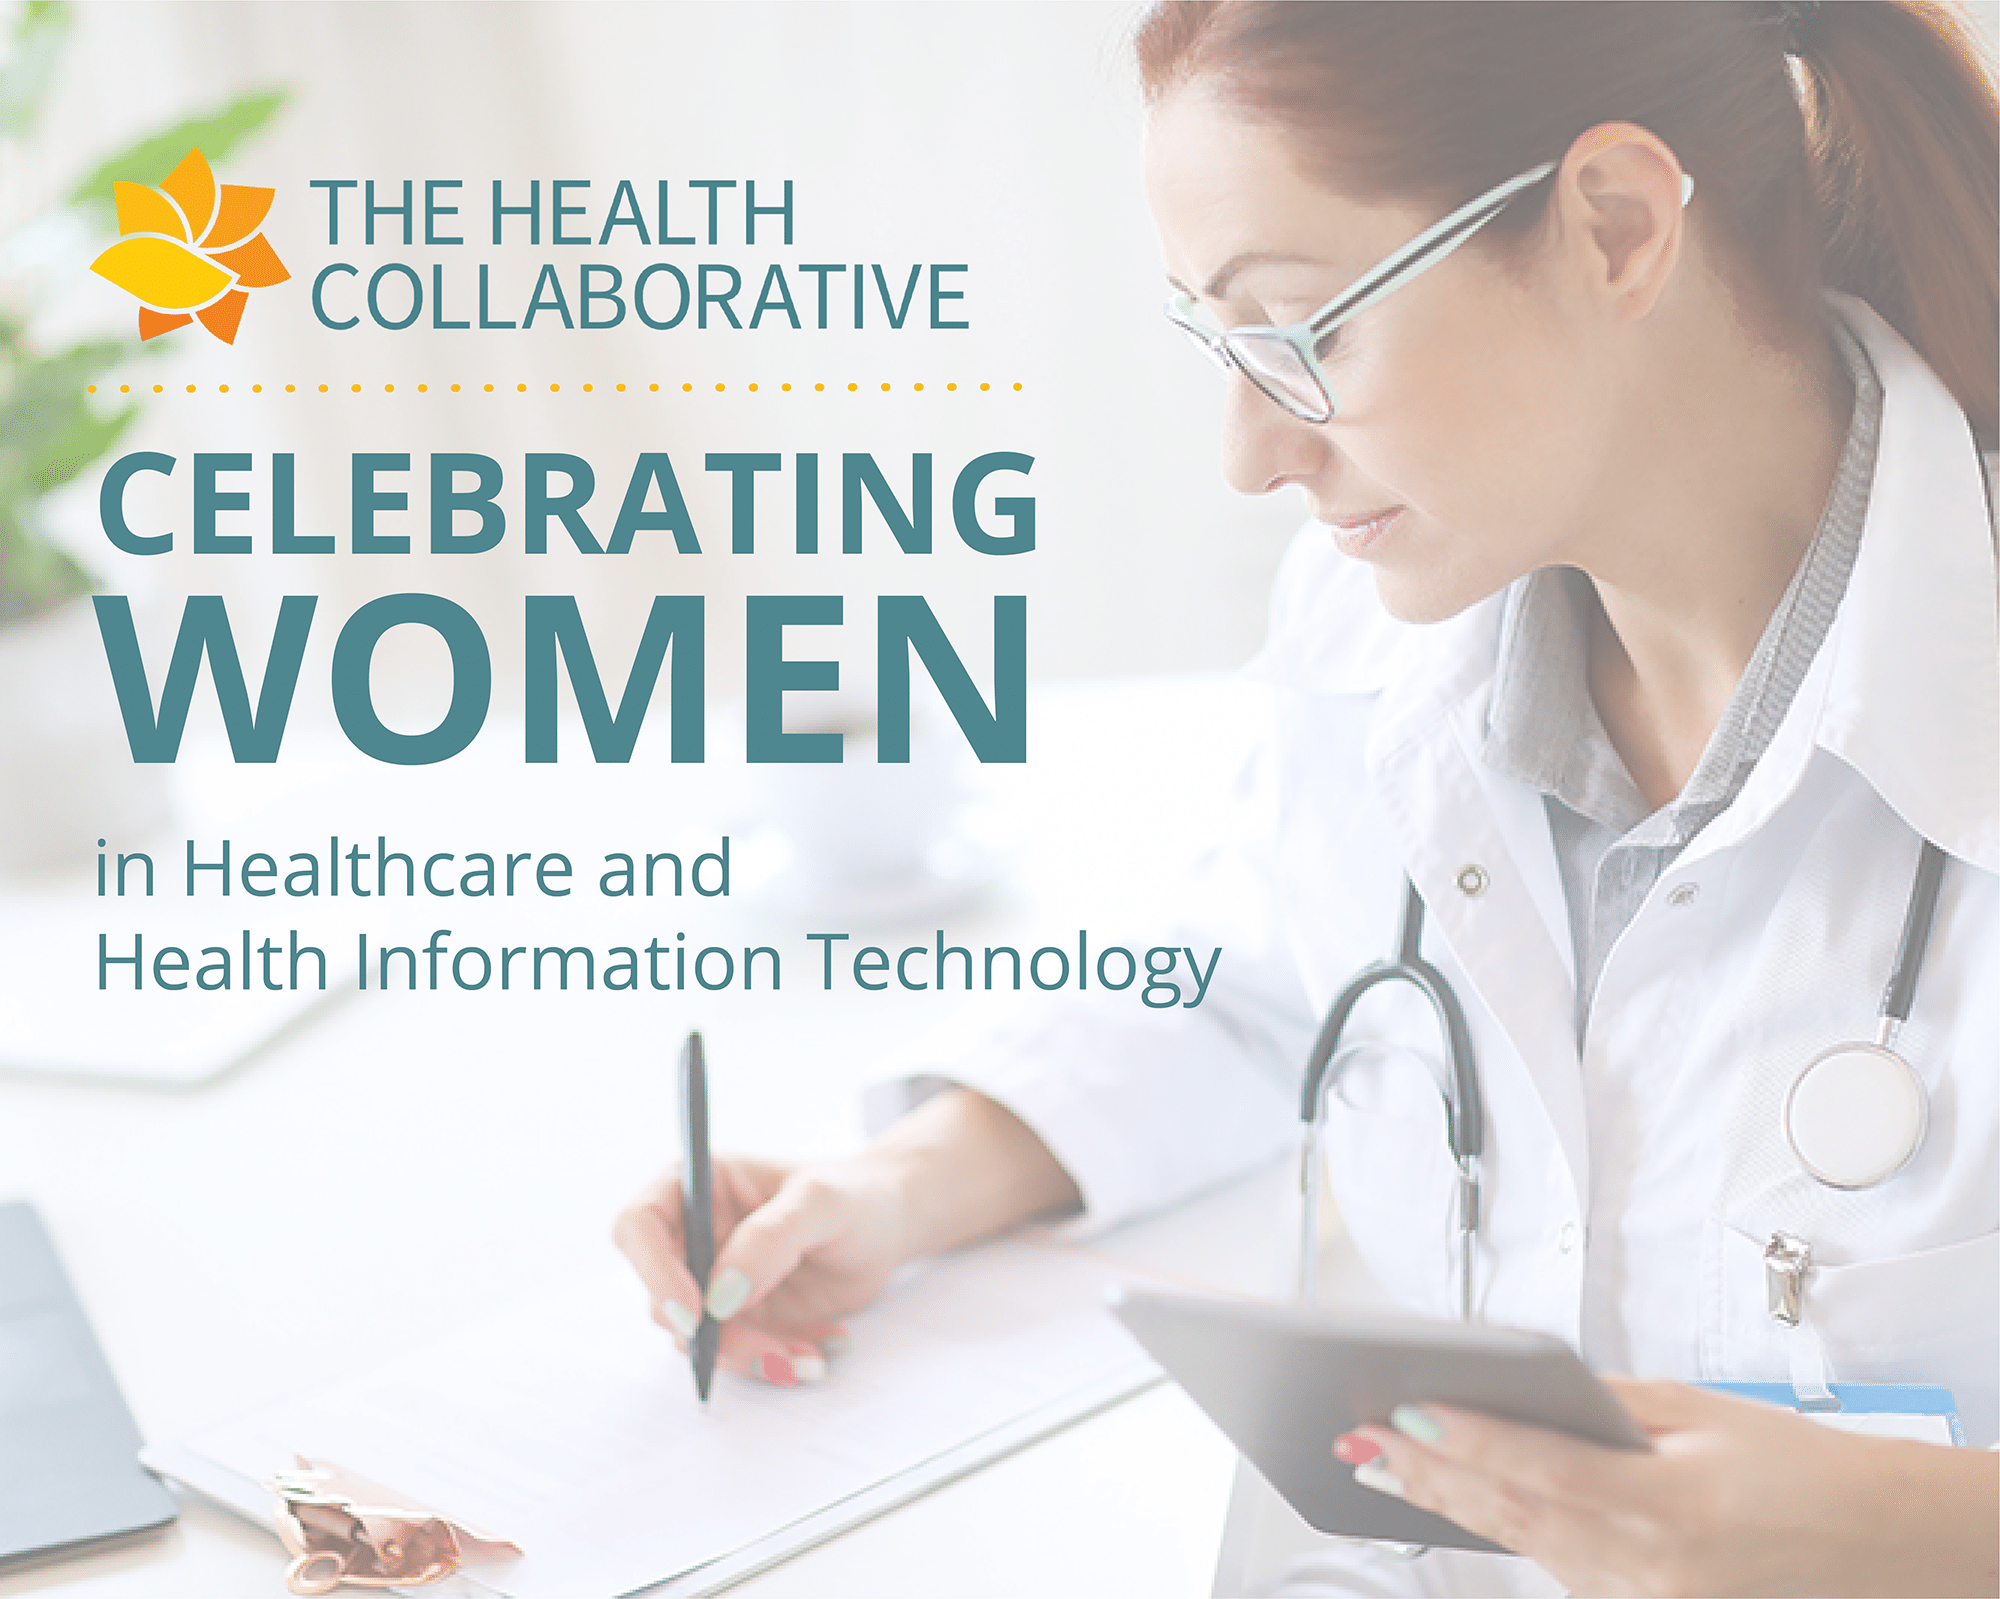 Celebrating women in healthcare and IT